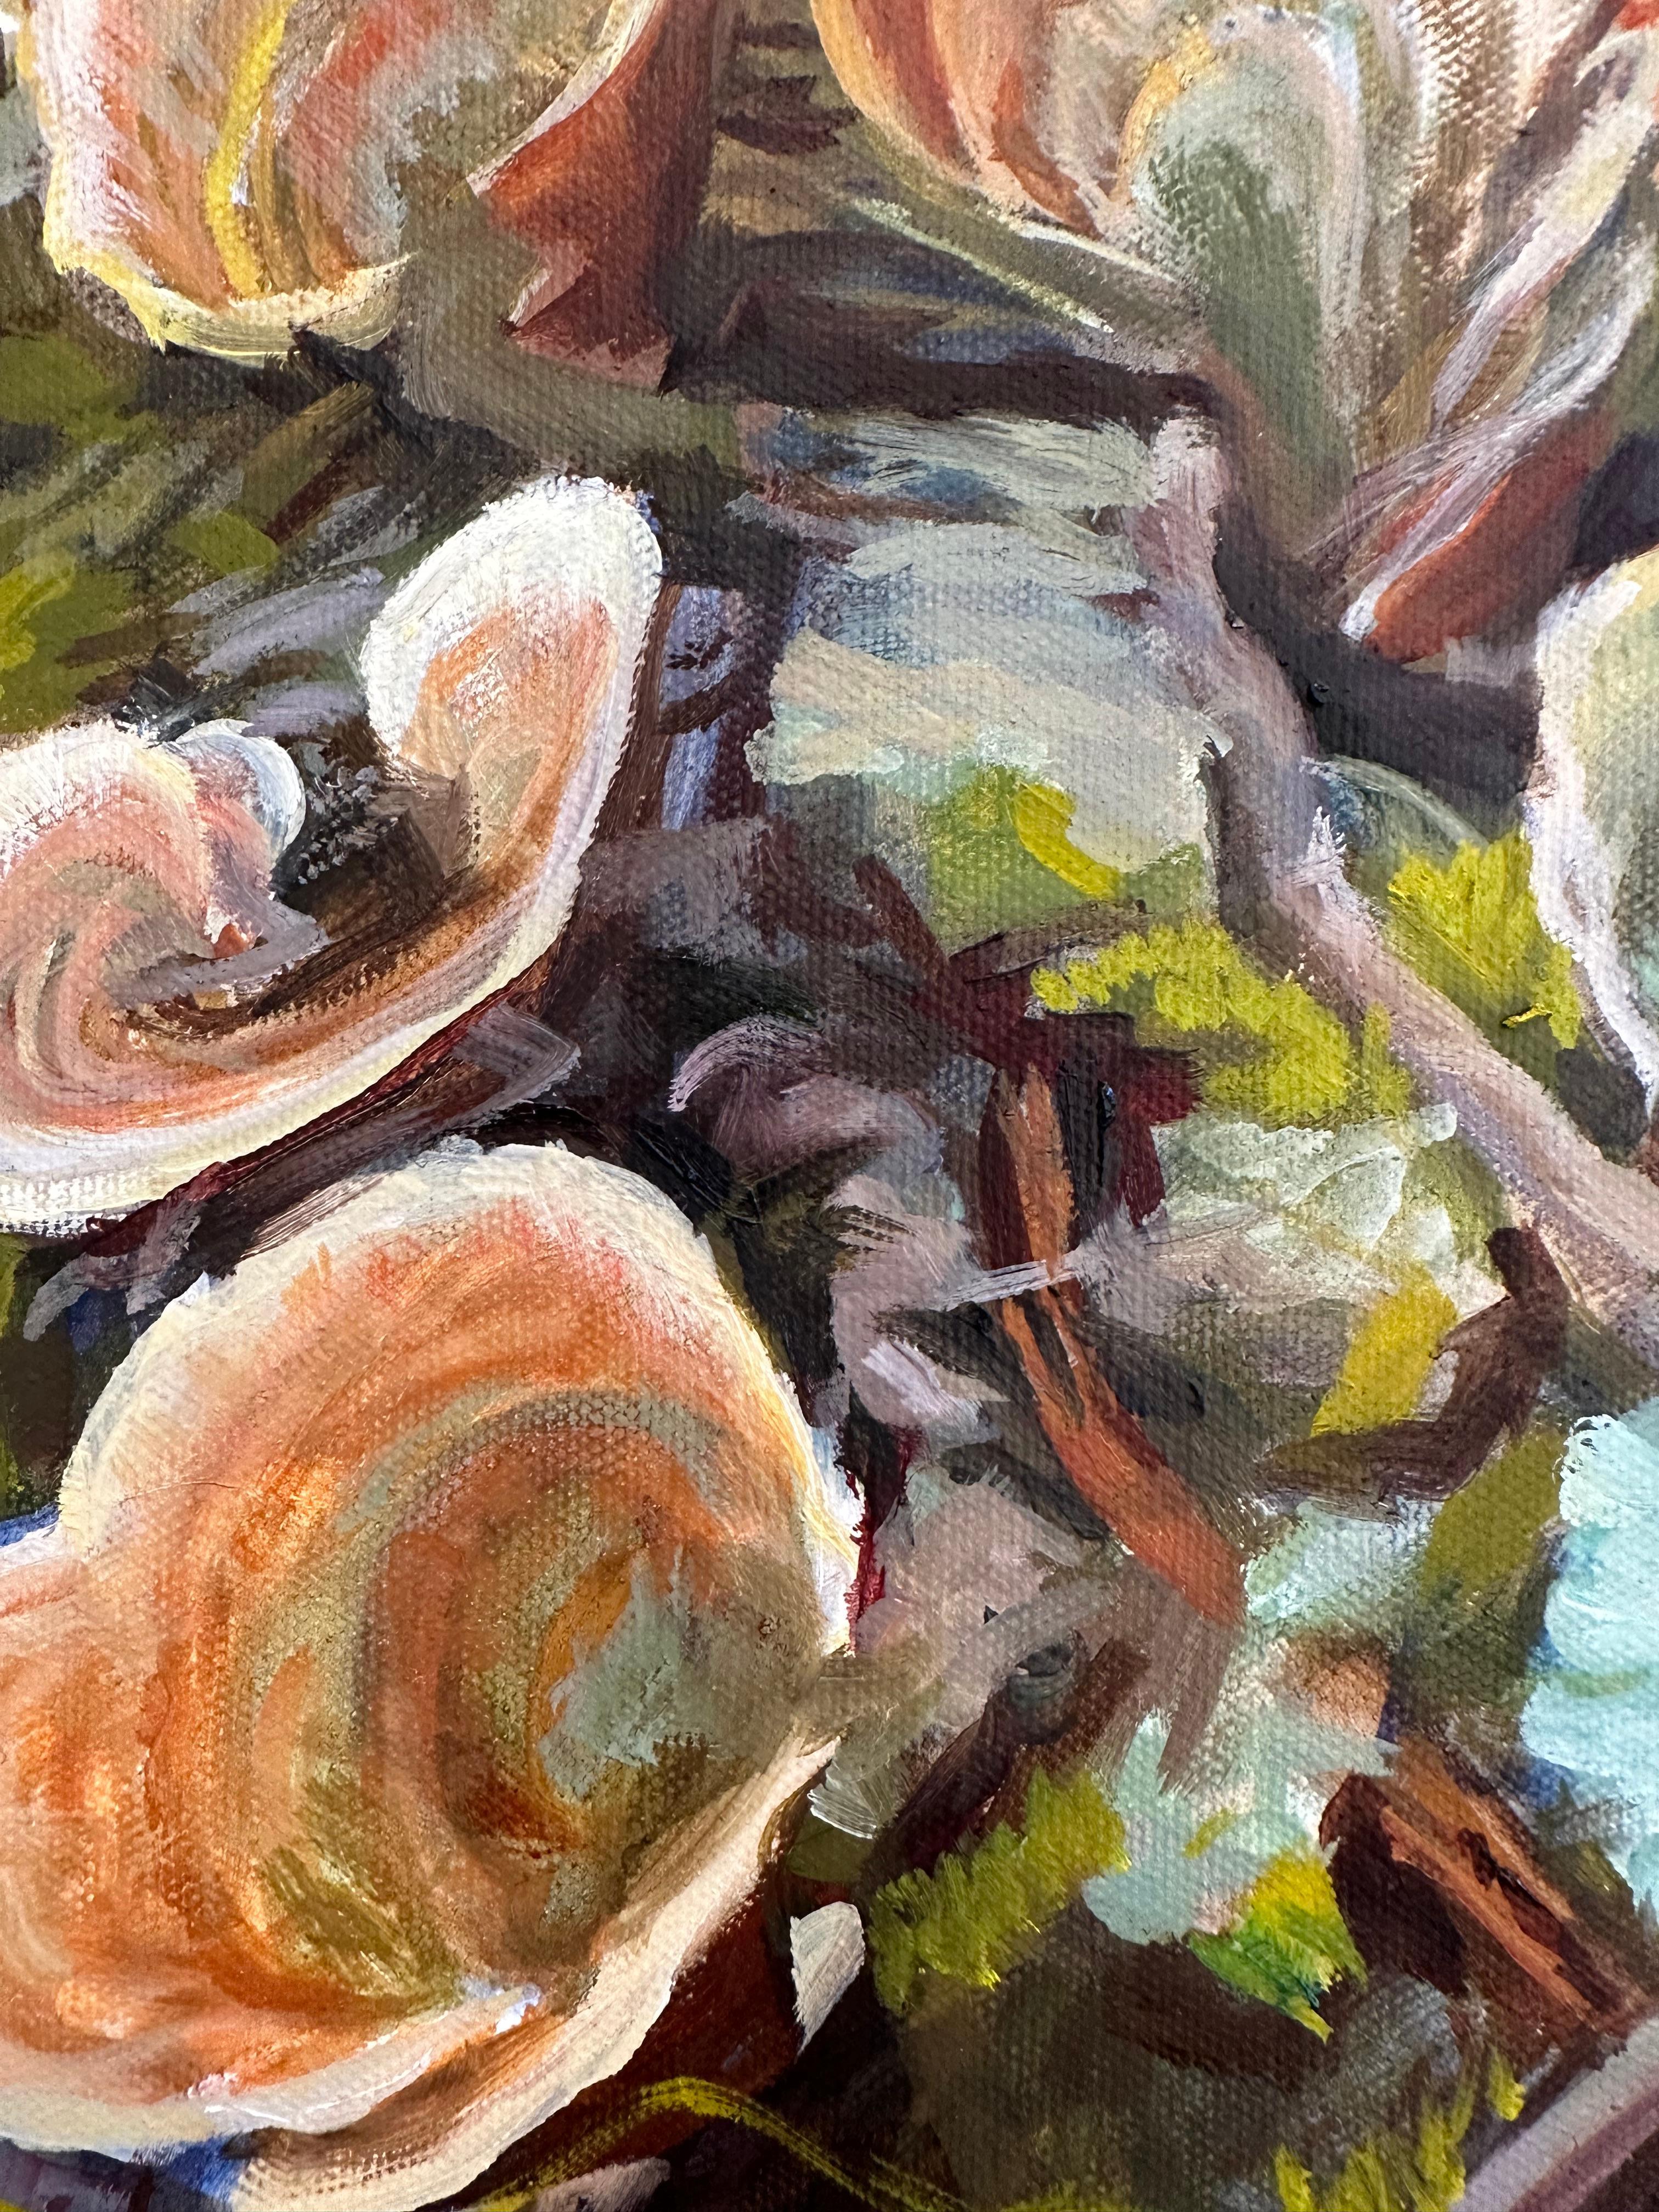 A turkey tails mushroom in hues of green, orange, ivory, and brown is masterfully painted, arranged in a dynamic, asymmetrical composition, luminous against an earthy background of sticks and moss. Signed, dated and titled on verso.

Andrea